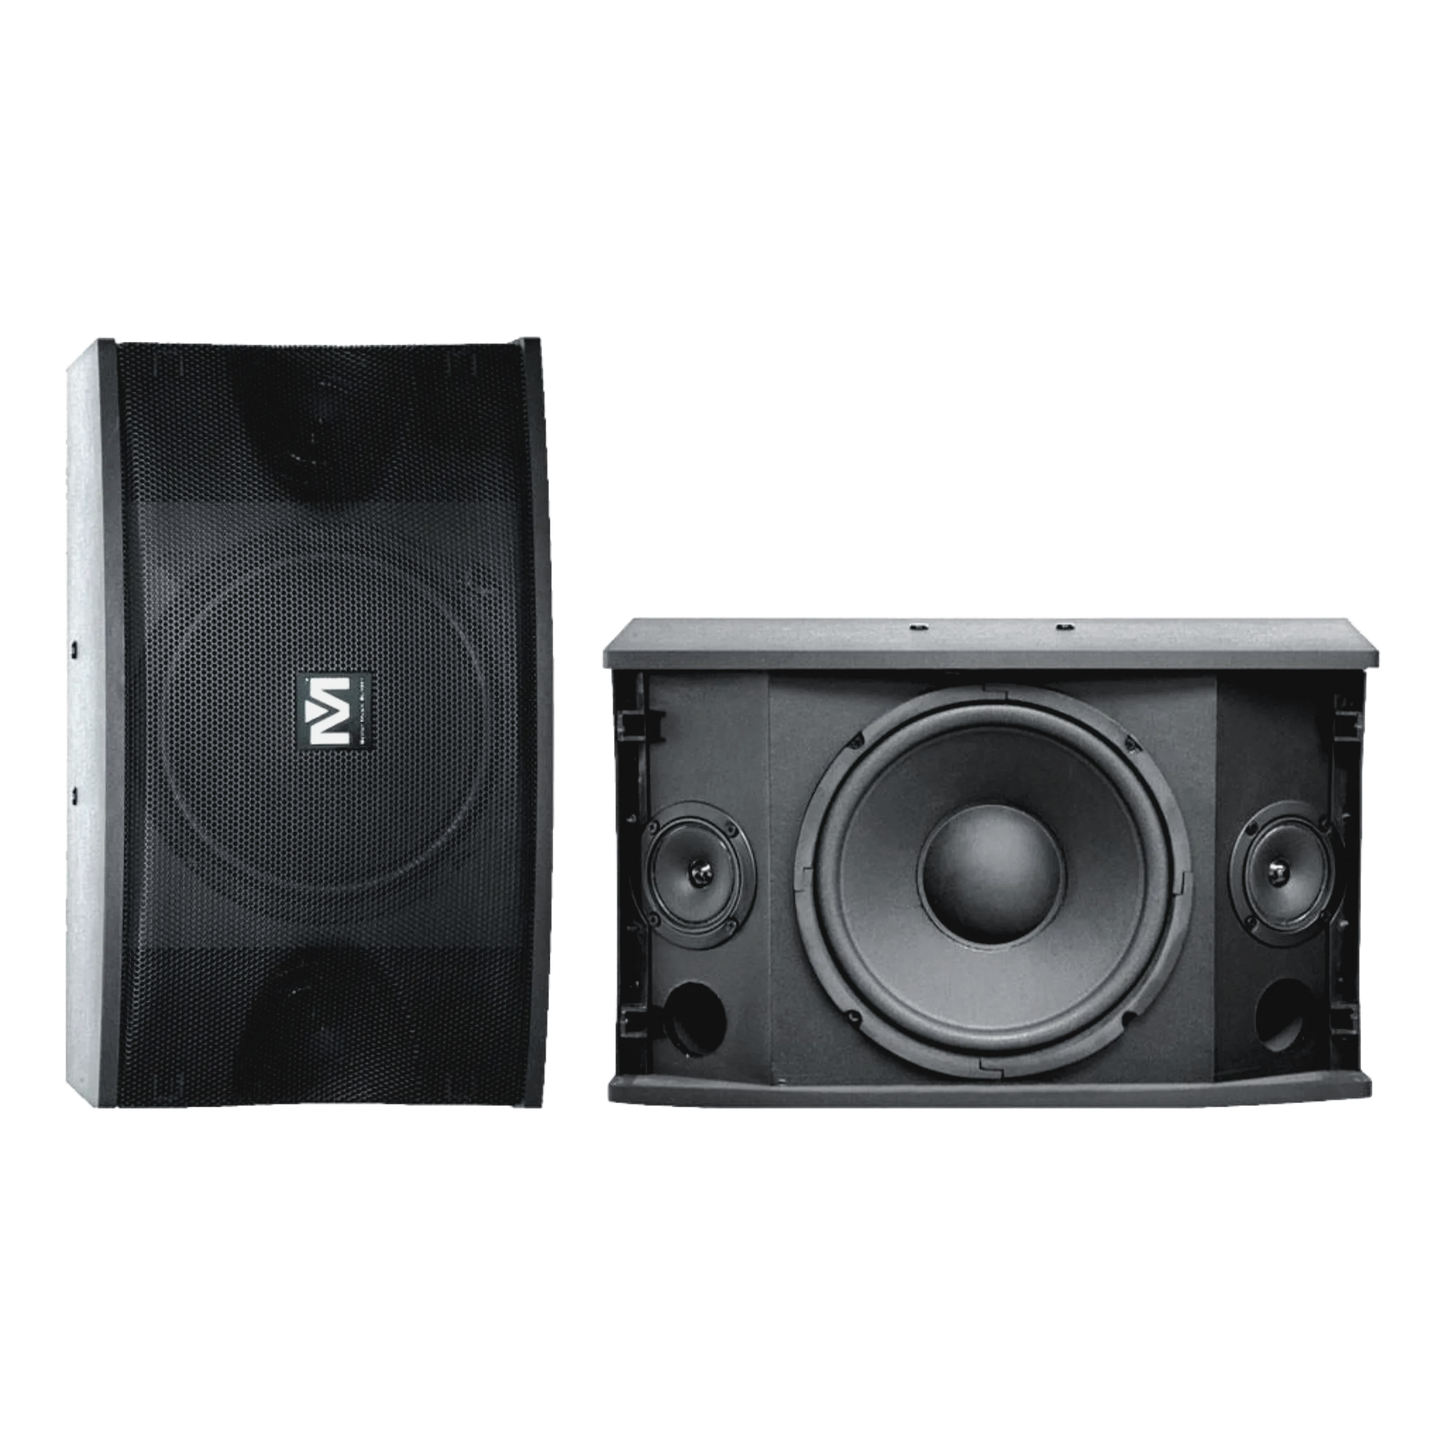 Holiday Encore Bundle 1: Mixing Amplifier, Speakers, Microphones, and Accessories (4 items)